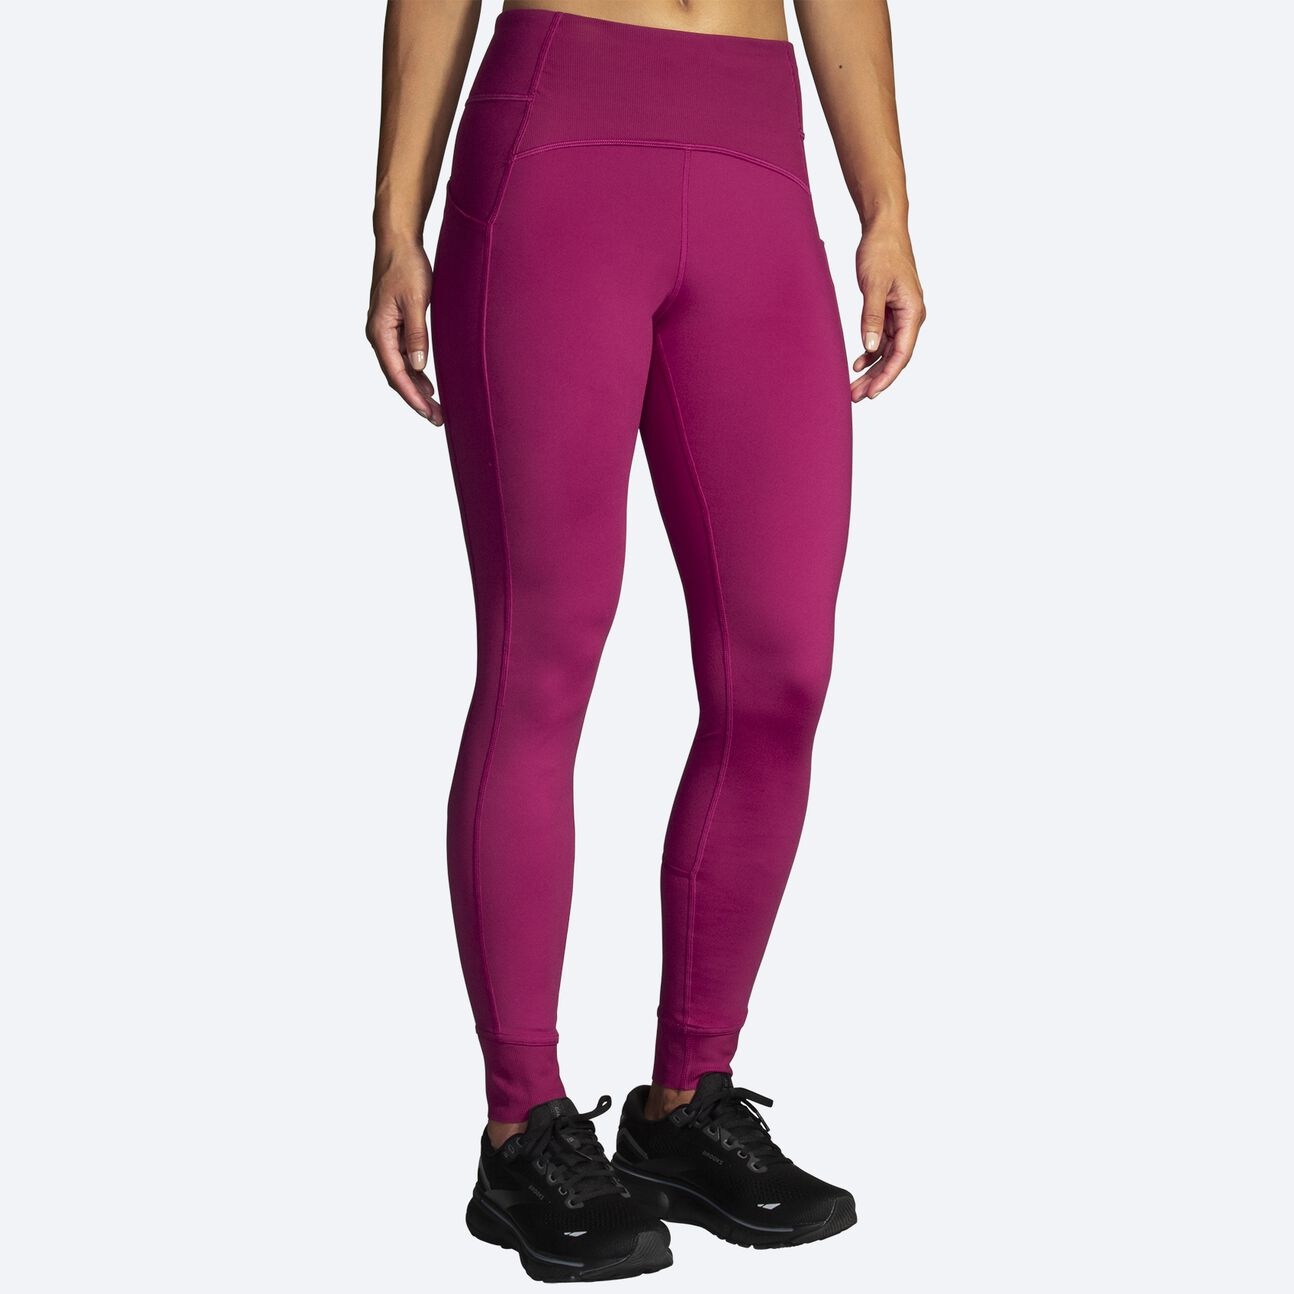 WOMEN'S MOMENTUM THERMAL TIGHT - Extra Mile Fitness Company